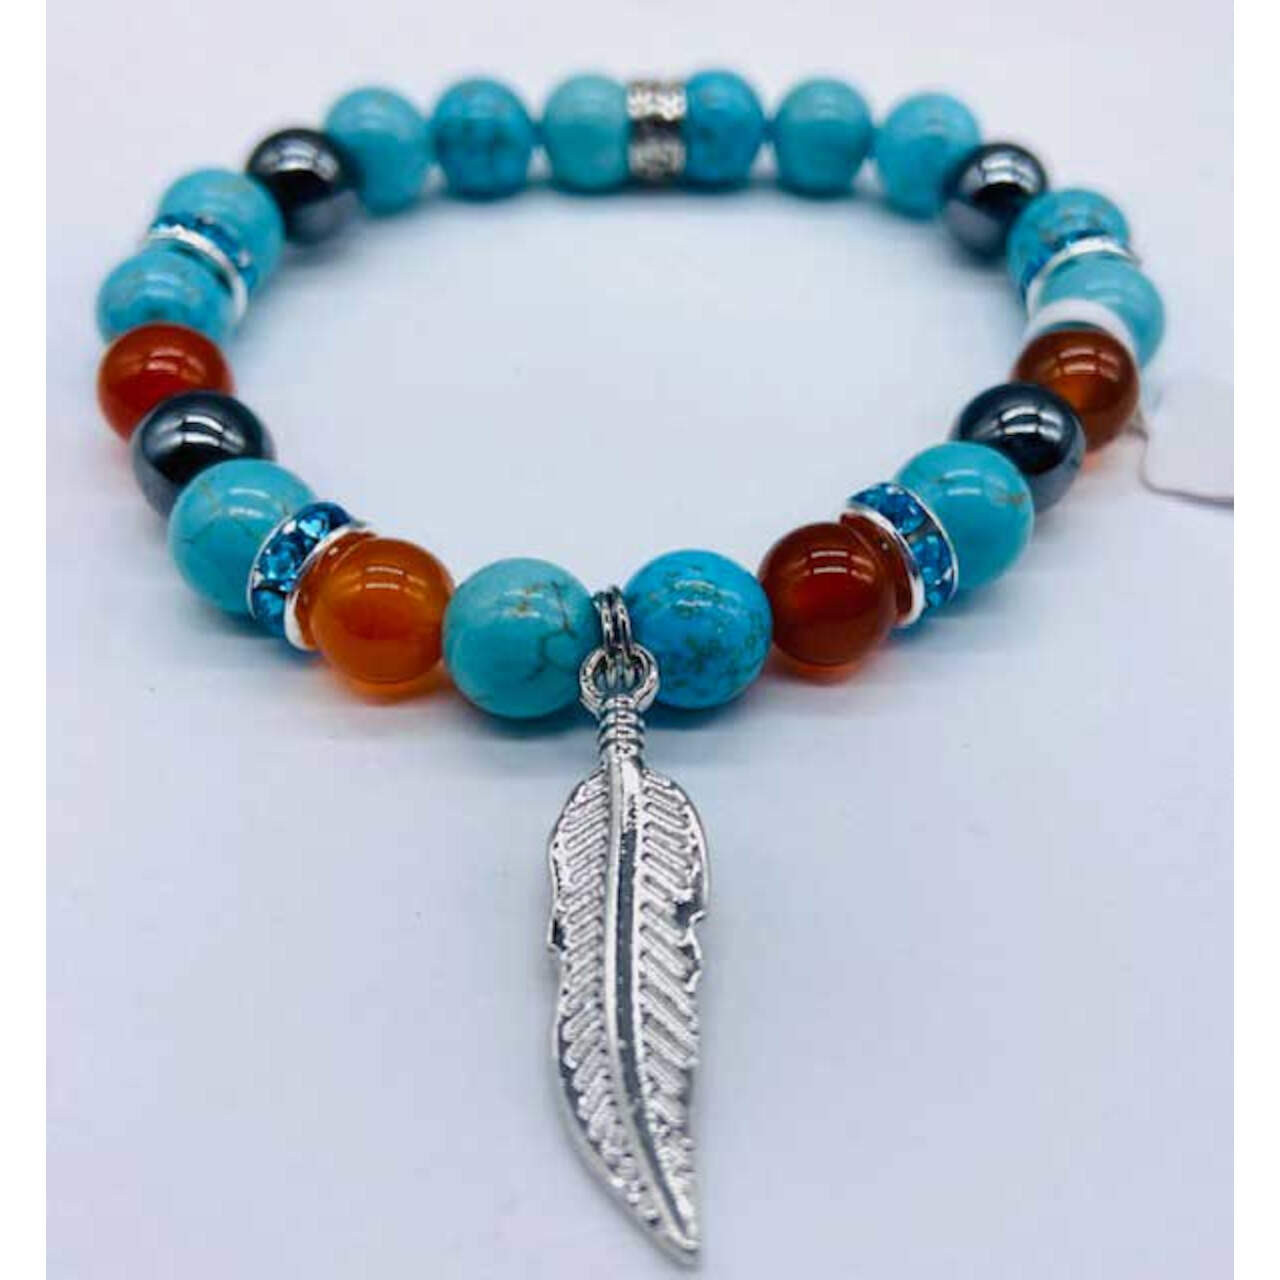 Turquoise, Red Agate, Hematite With Feather 8 mm.